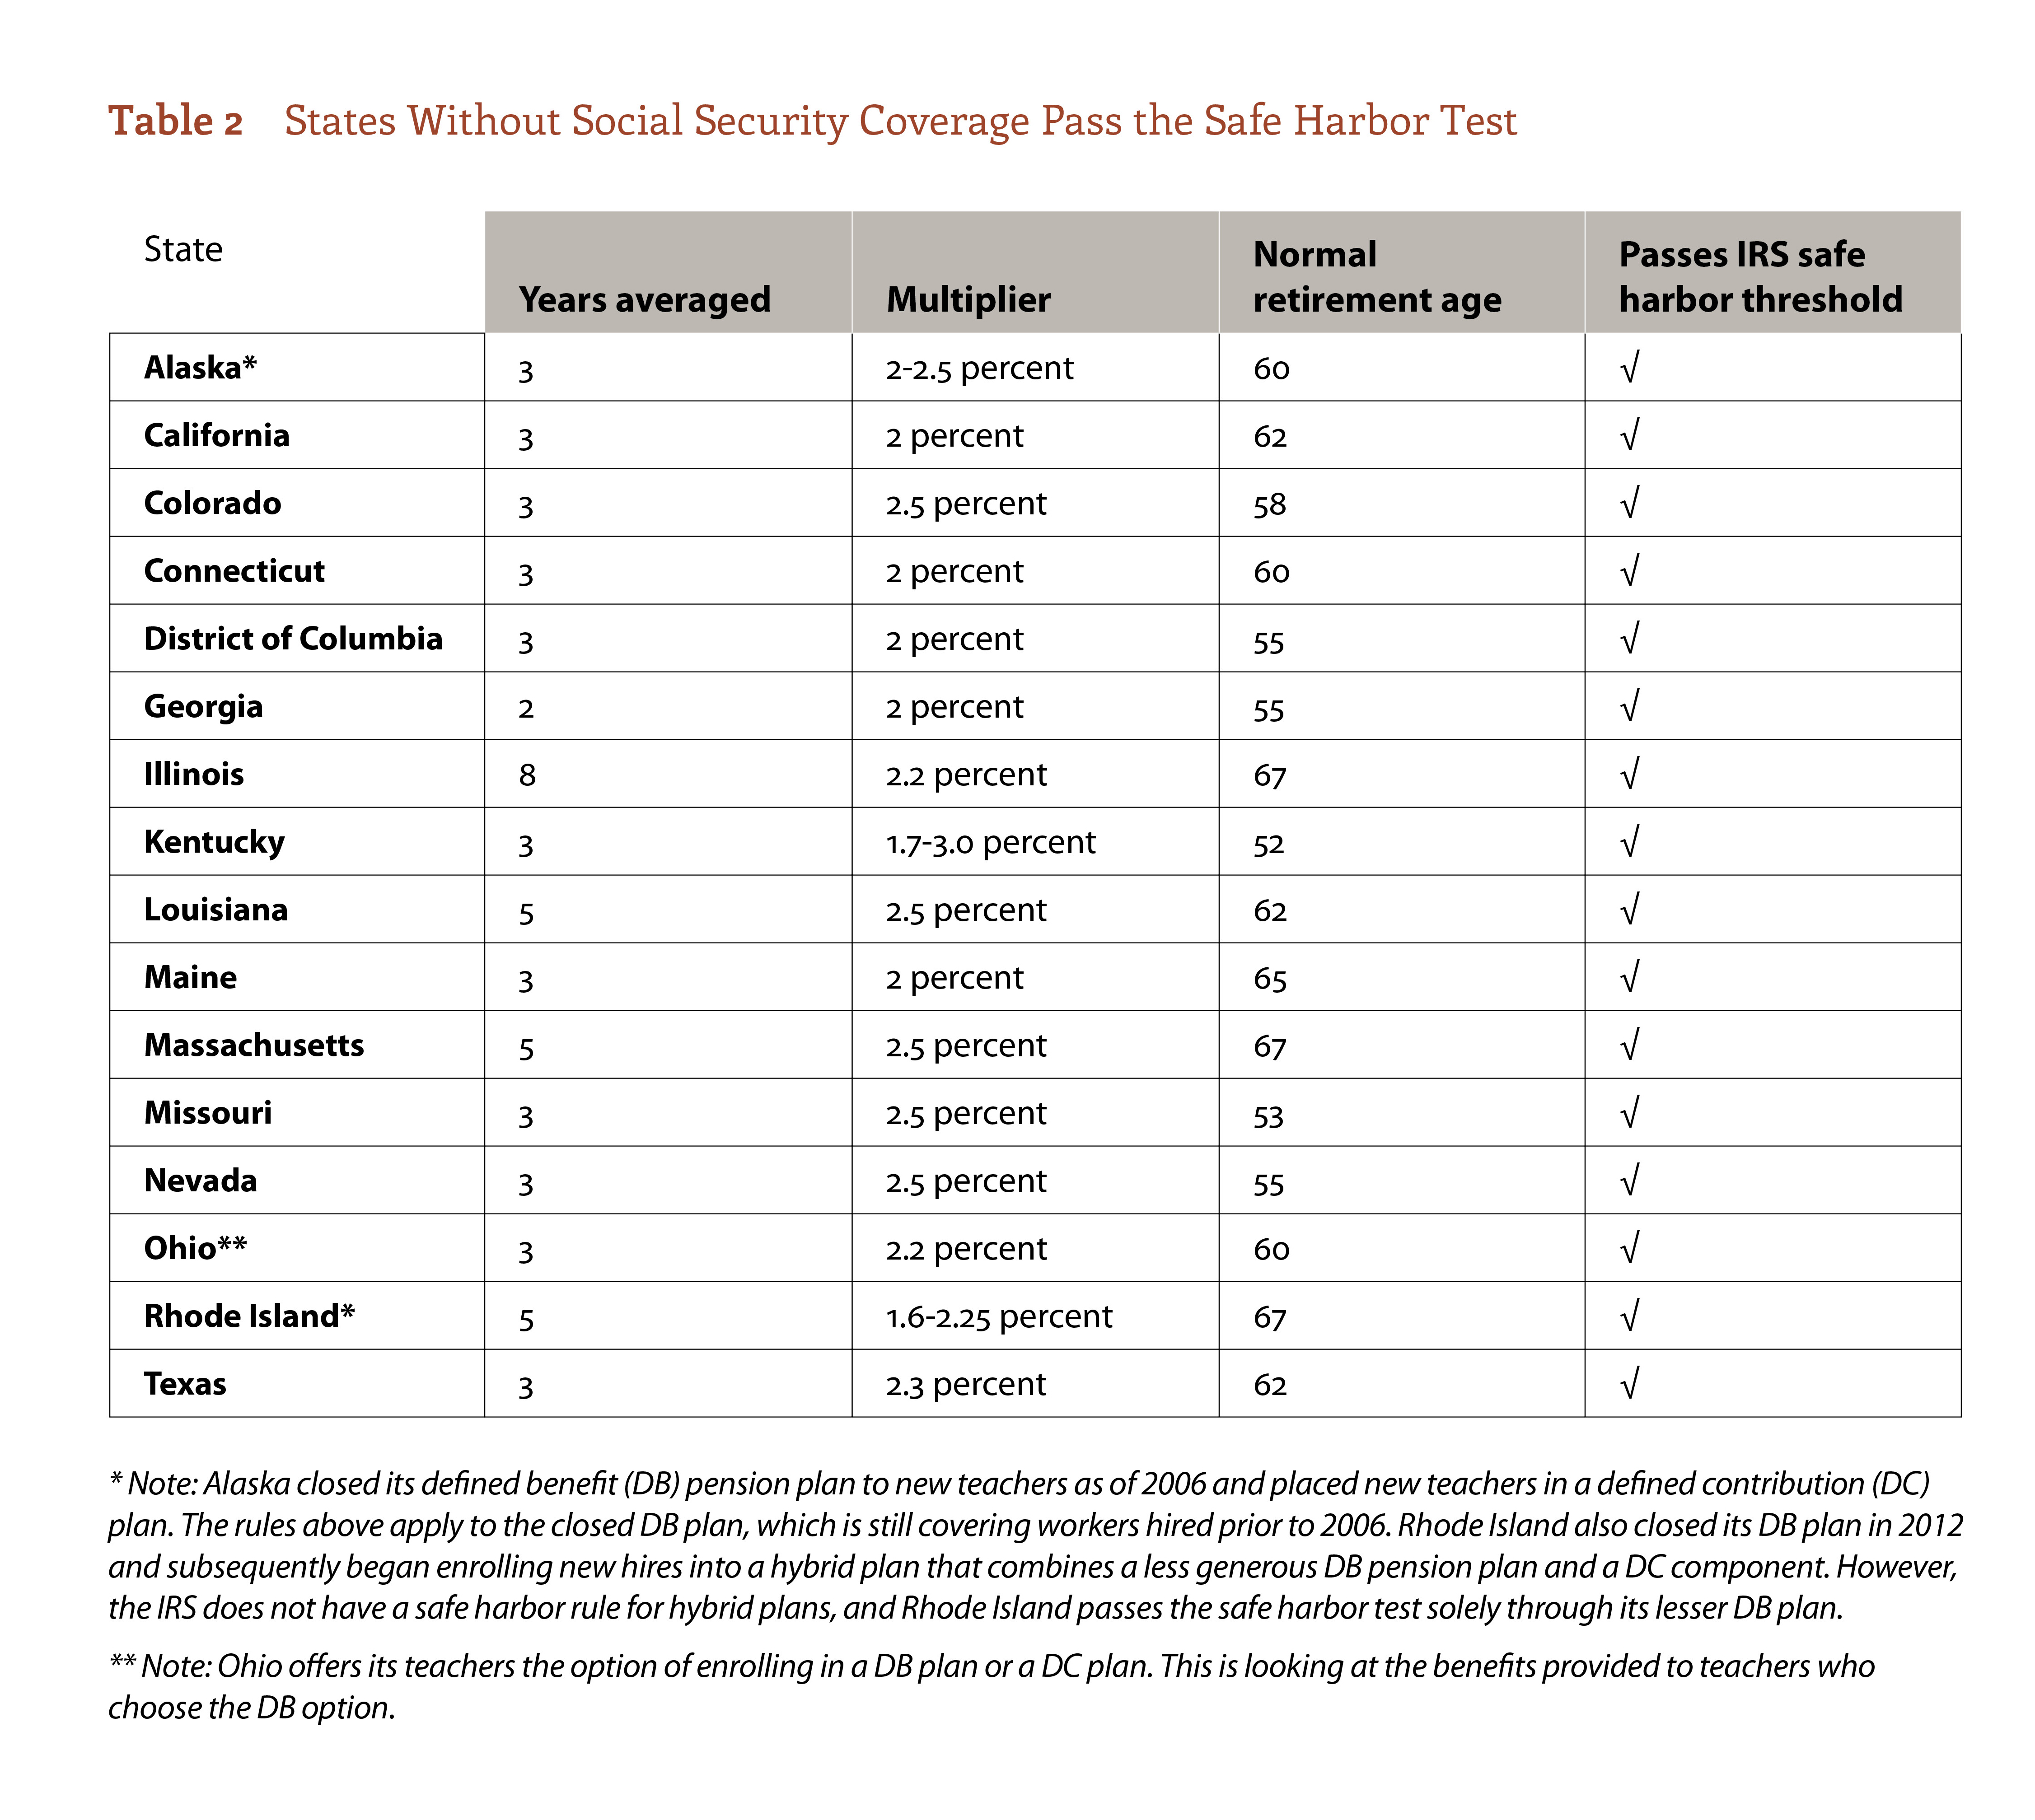 States Without Social Security Coverage Pass the Safe Harbor Test